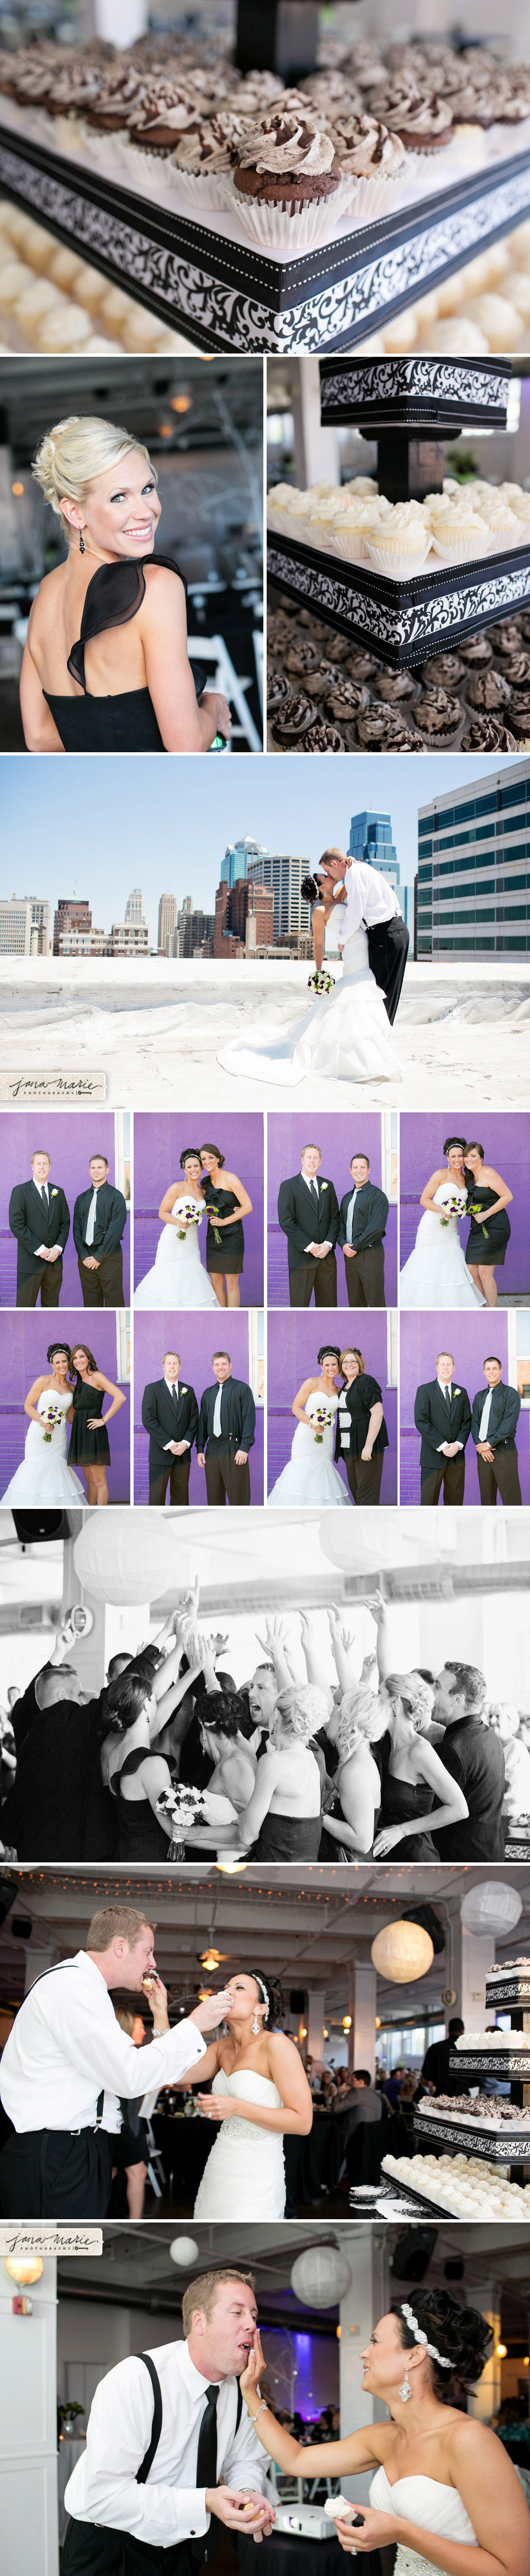 Large bridal party, purple walls, textures, urban wedding, rooftop portraits, Bride and groom, love